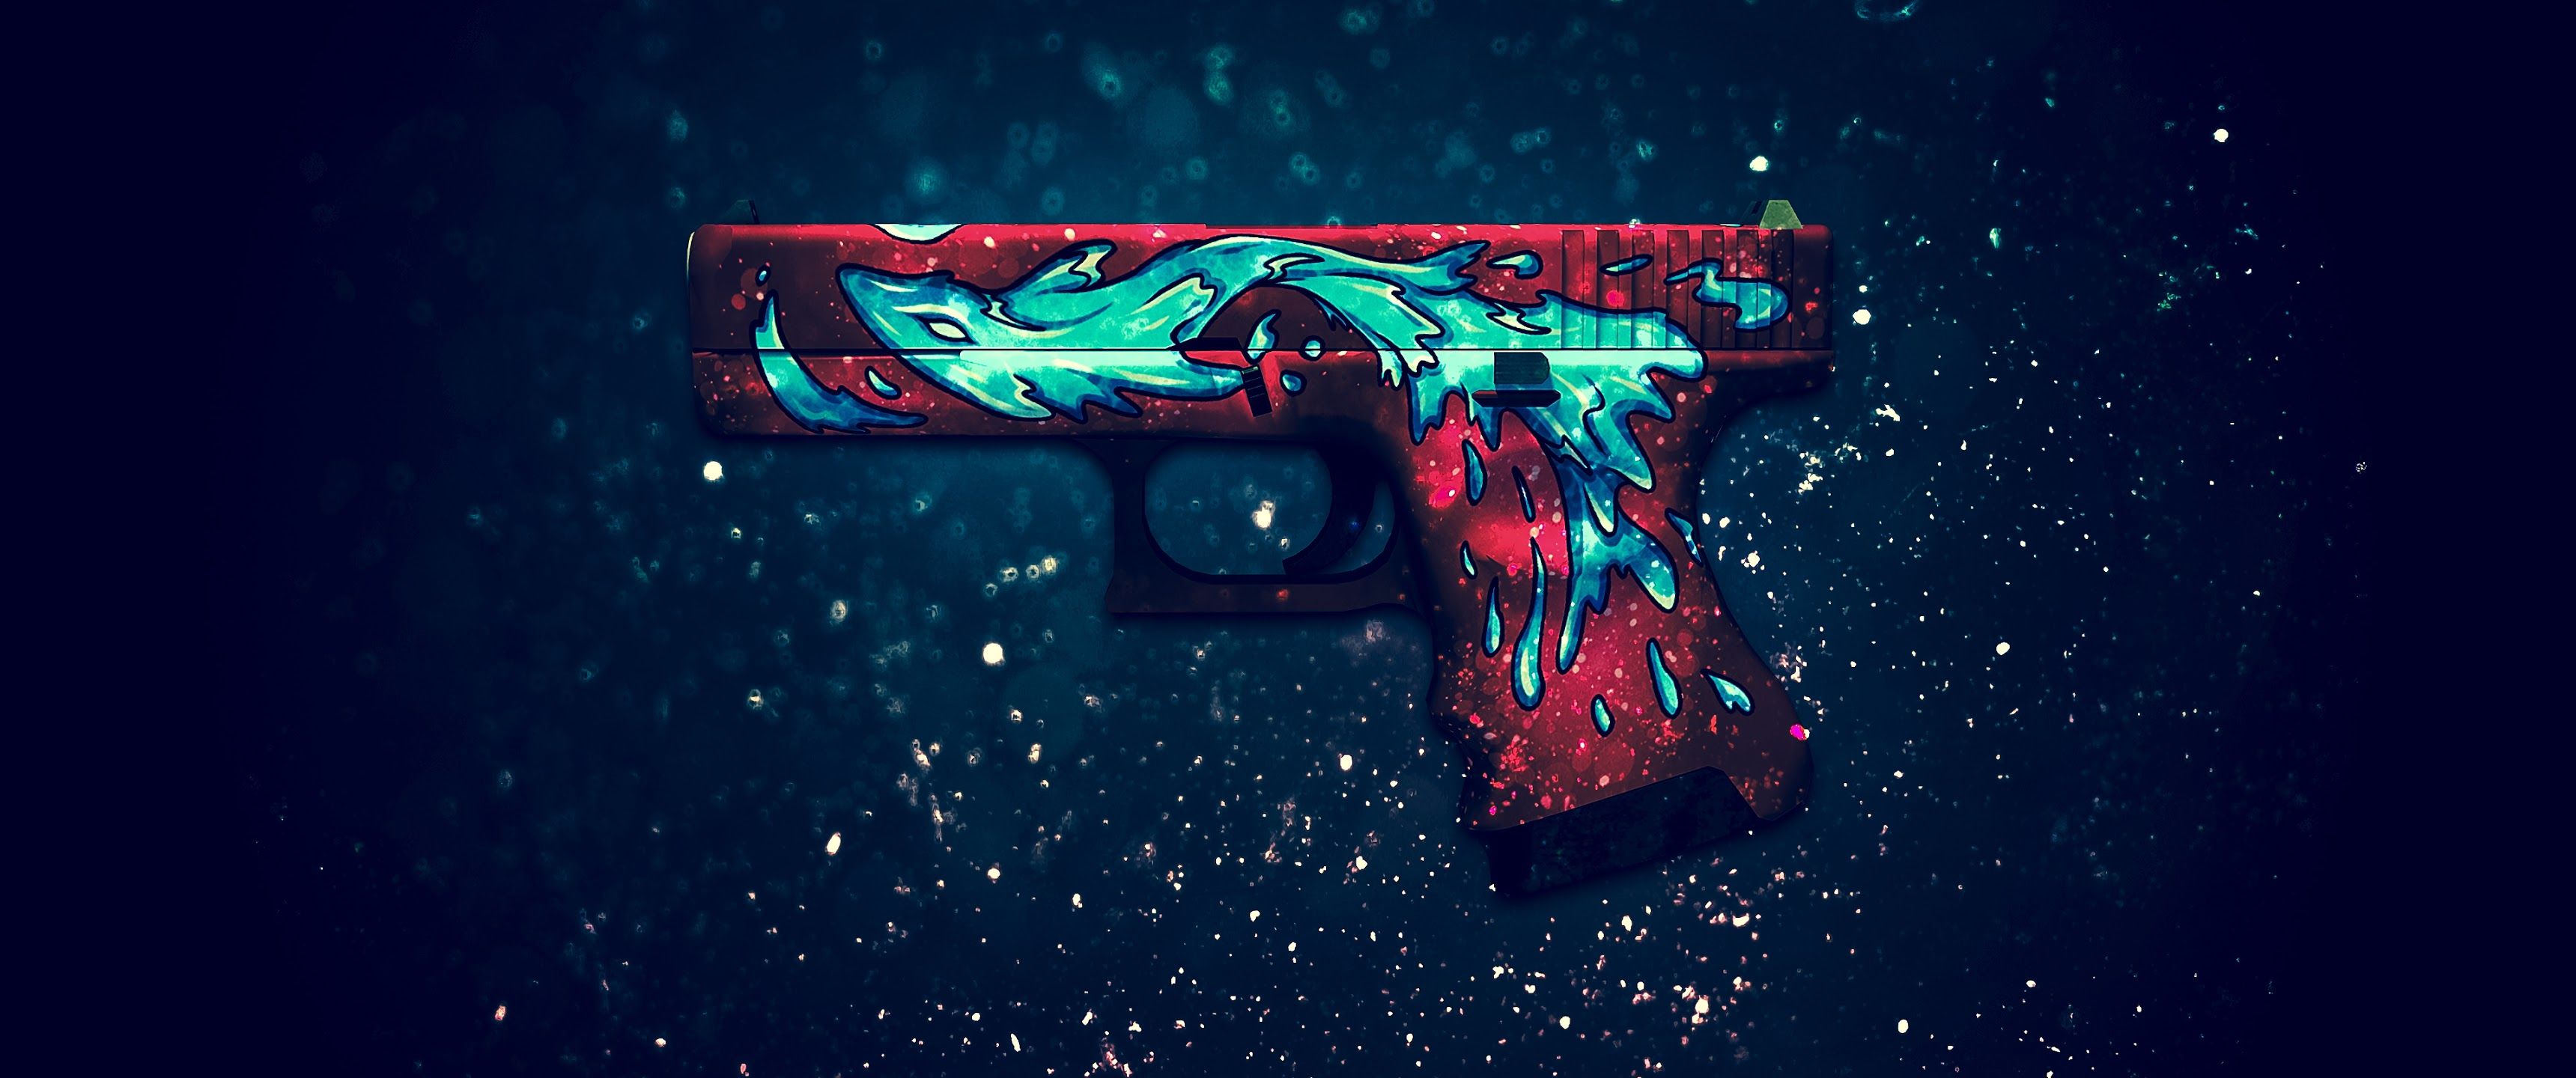 Best Anime CSGO Skins You Need To Have - Animeclap.com